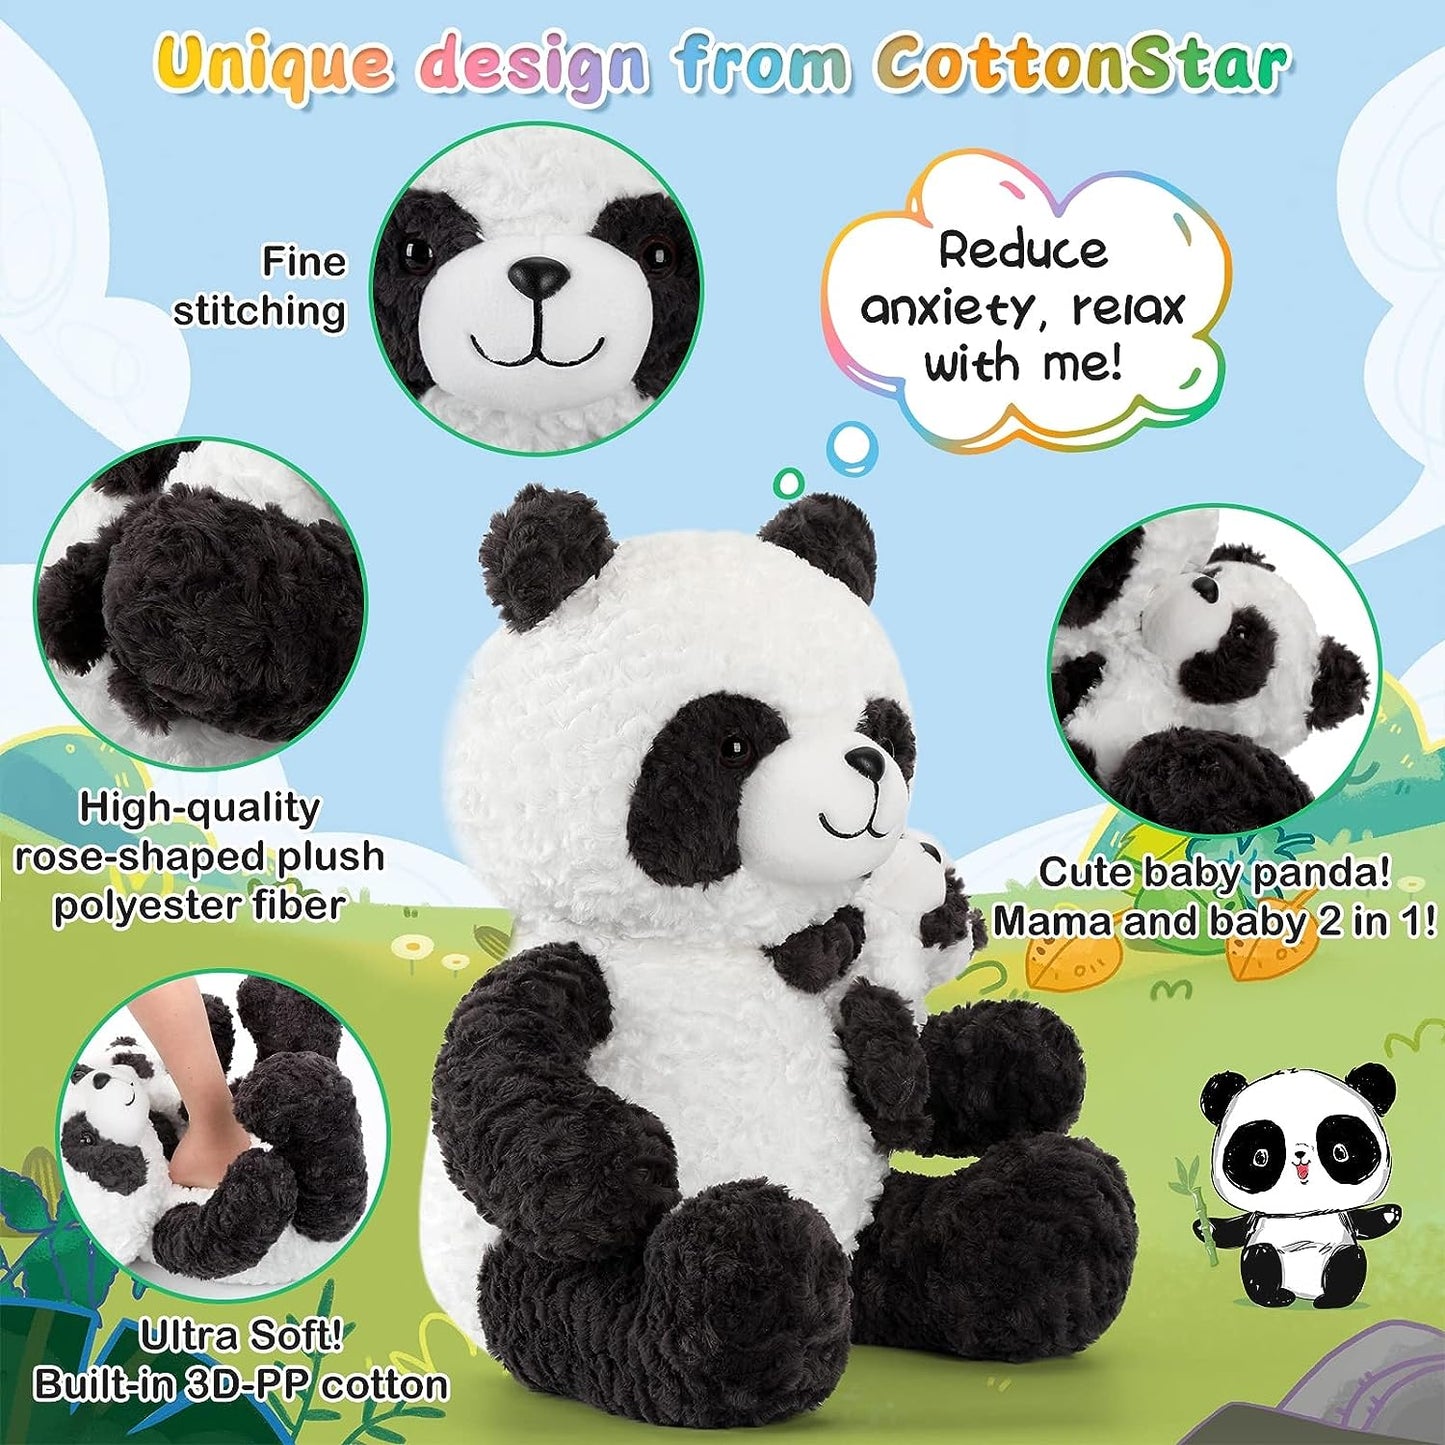 Adorable 1pc Mother and Child Animal Plush Toy Set - Panda Perfect Collectible Dolls for Baby Shower!